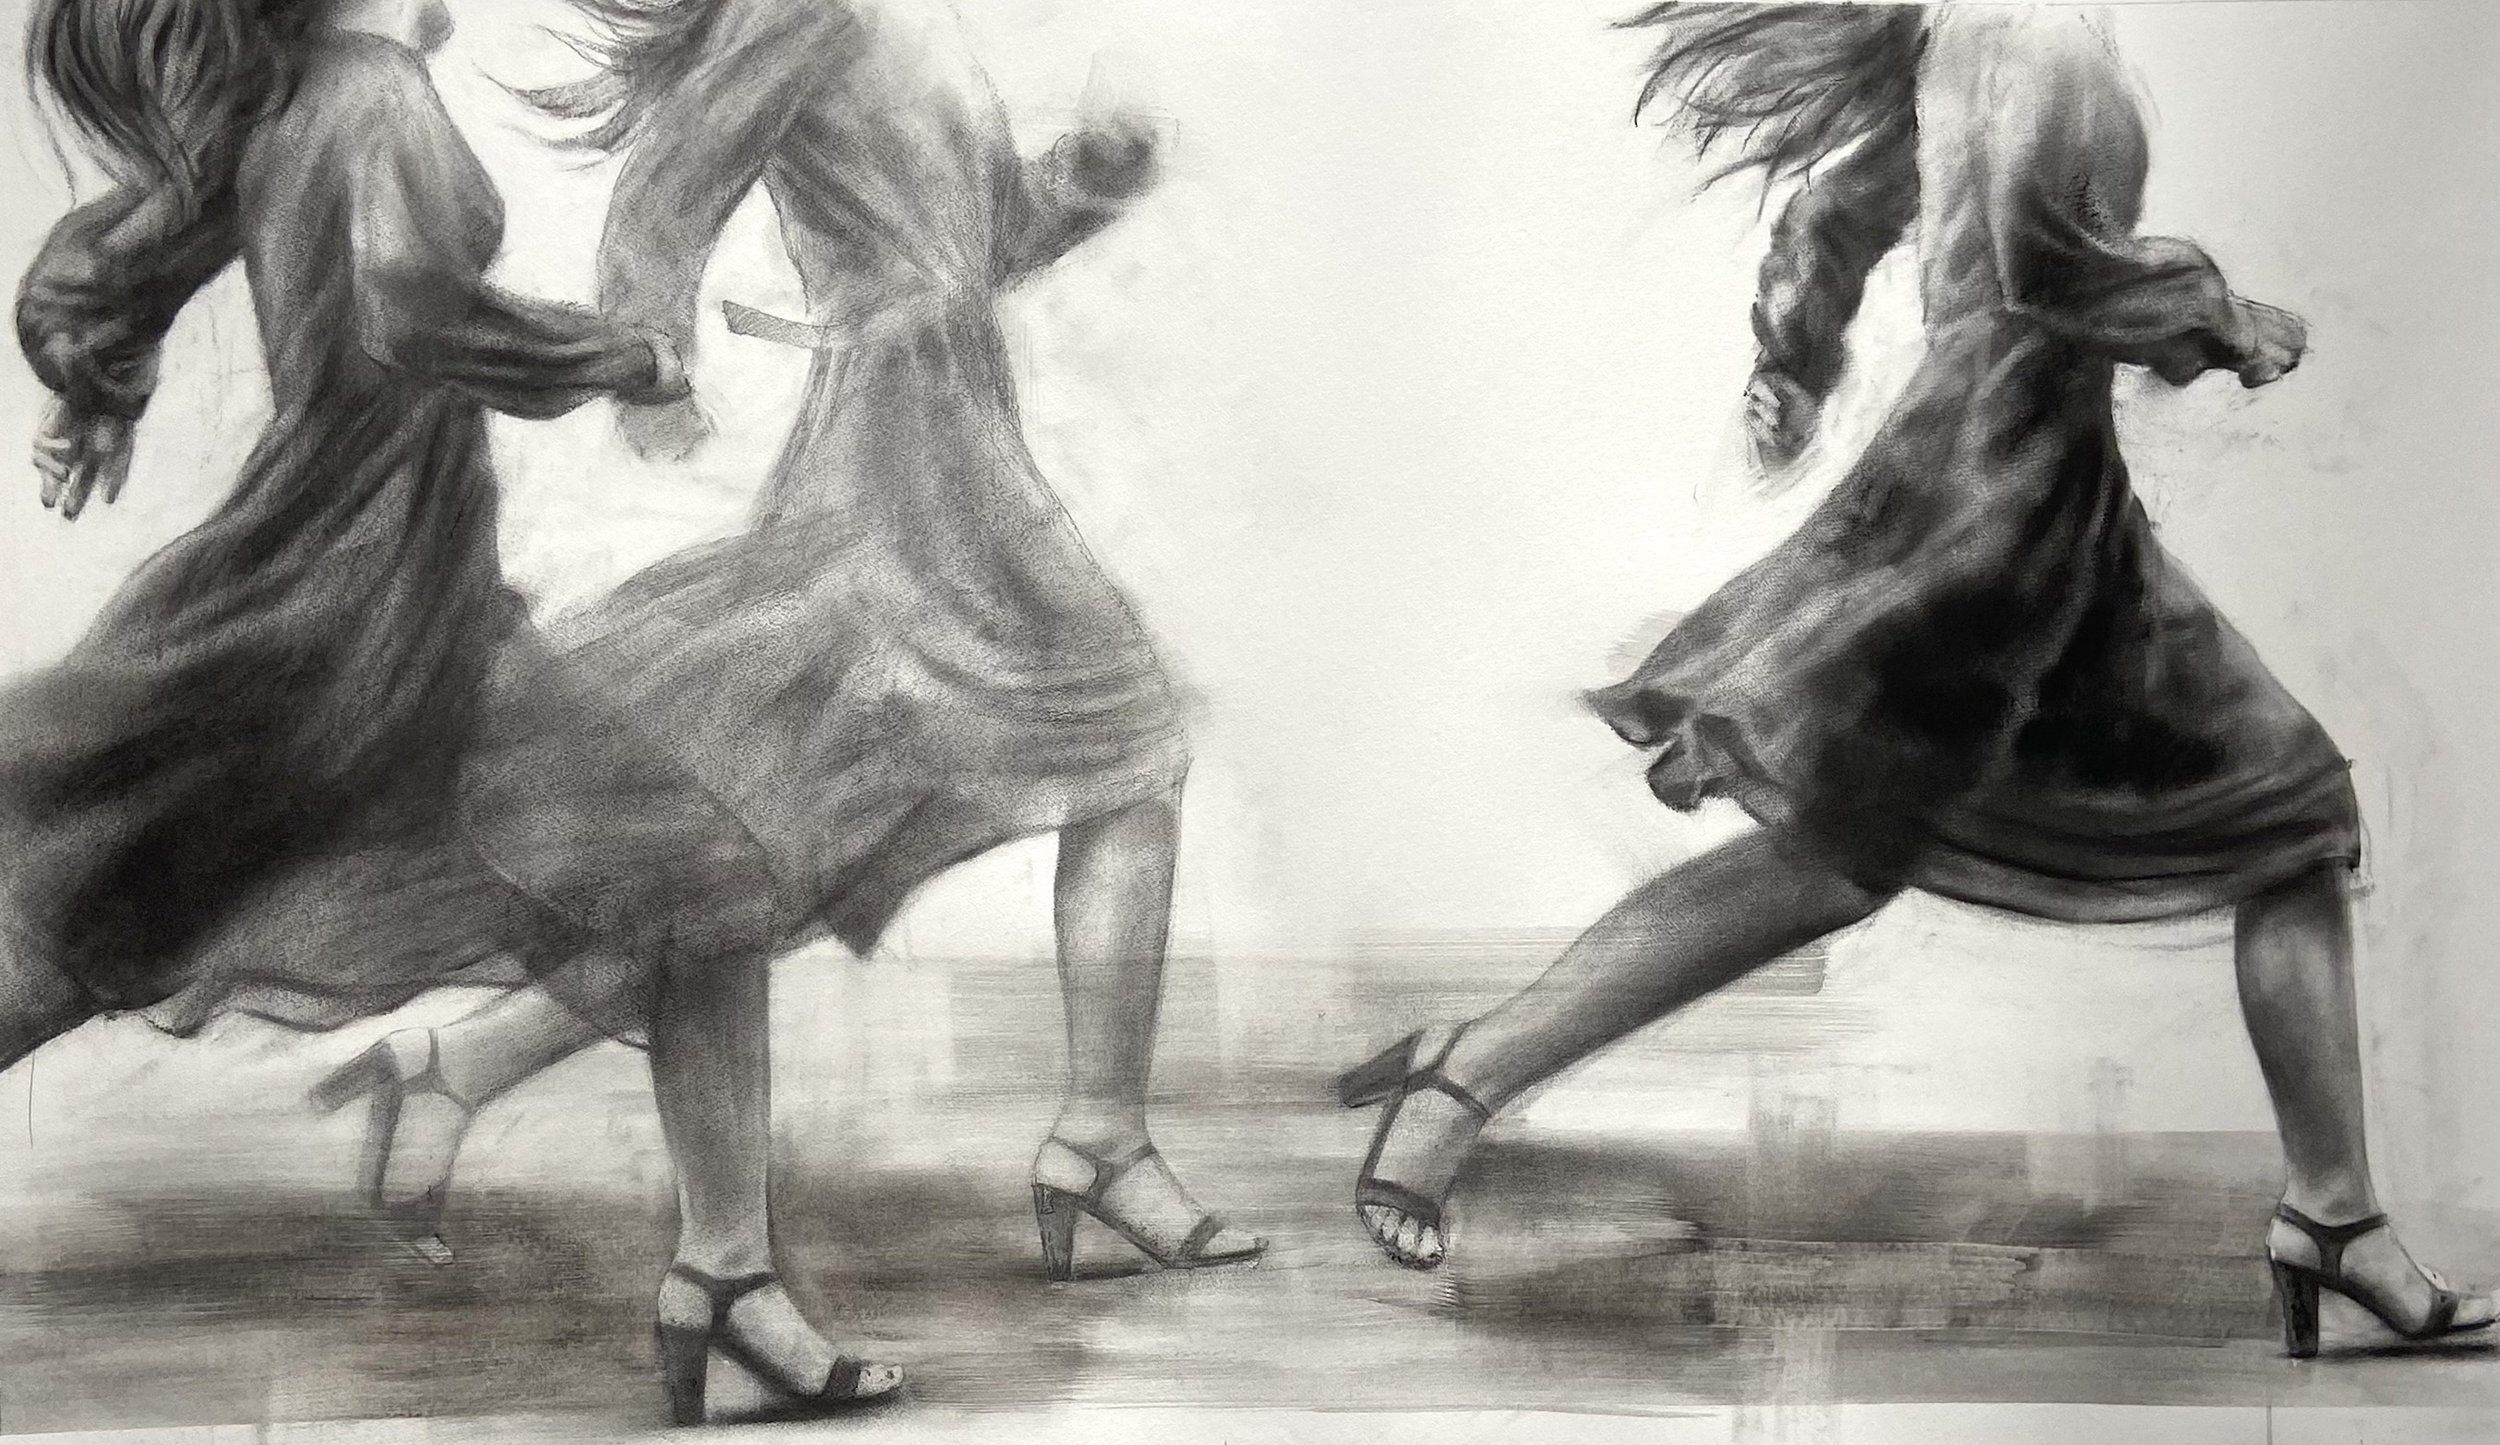  Title: The Intrepids  Size:  70 x 128 cm  Medium: Charcoal on paper 